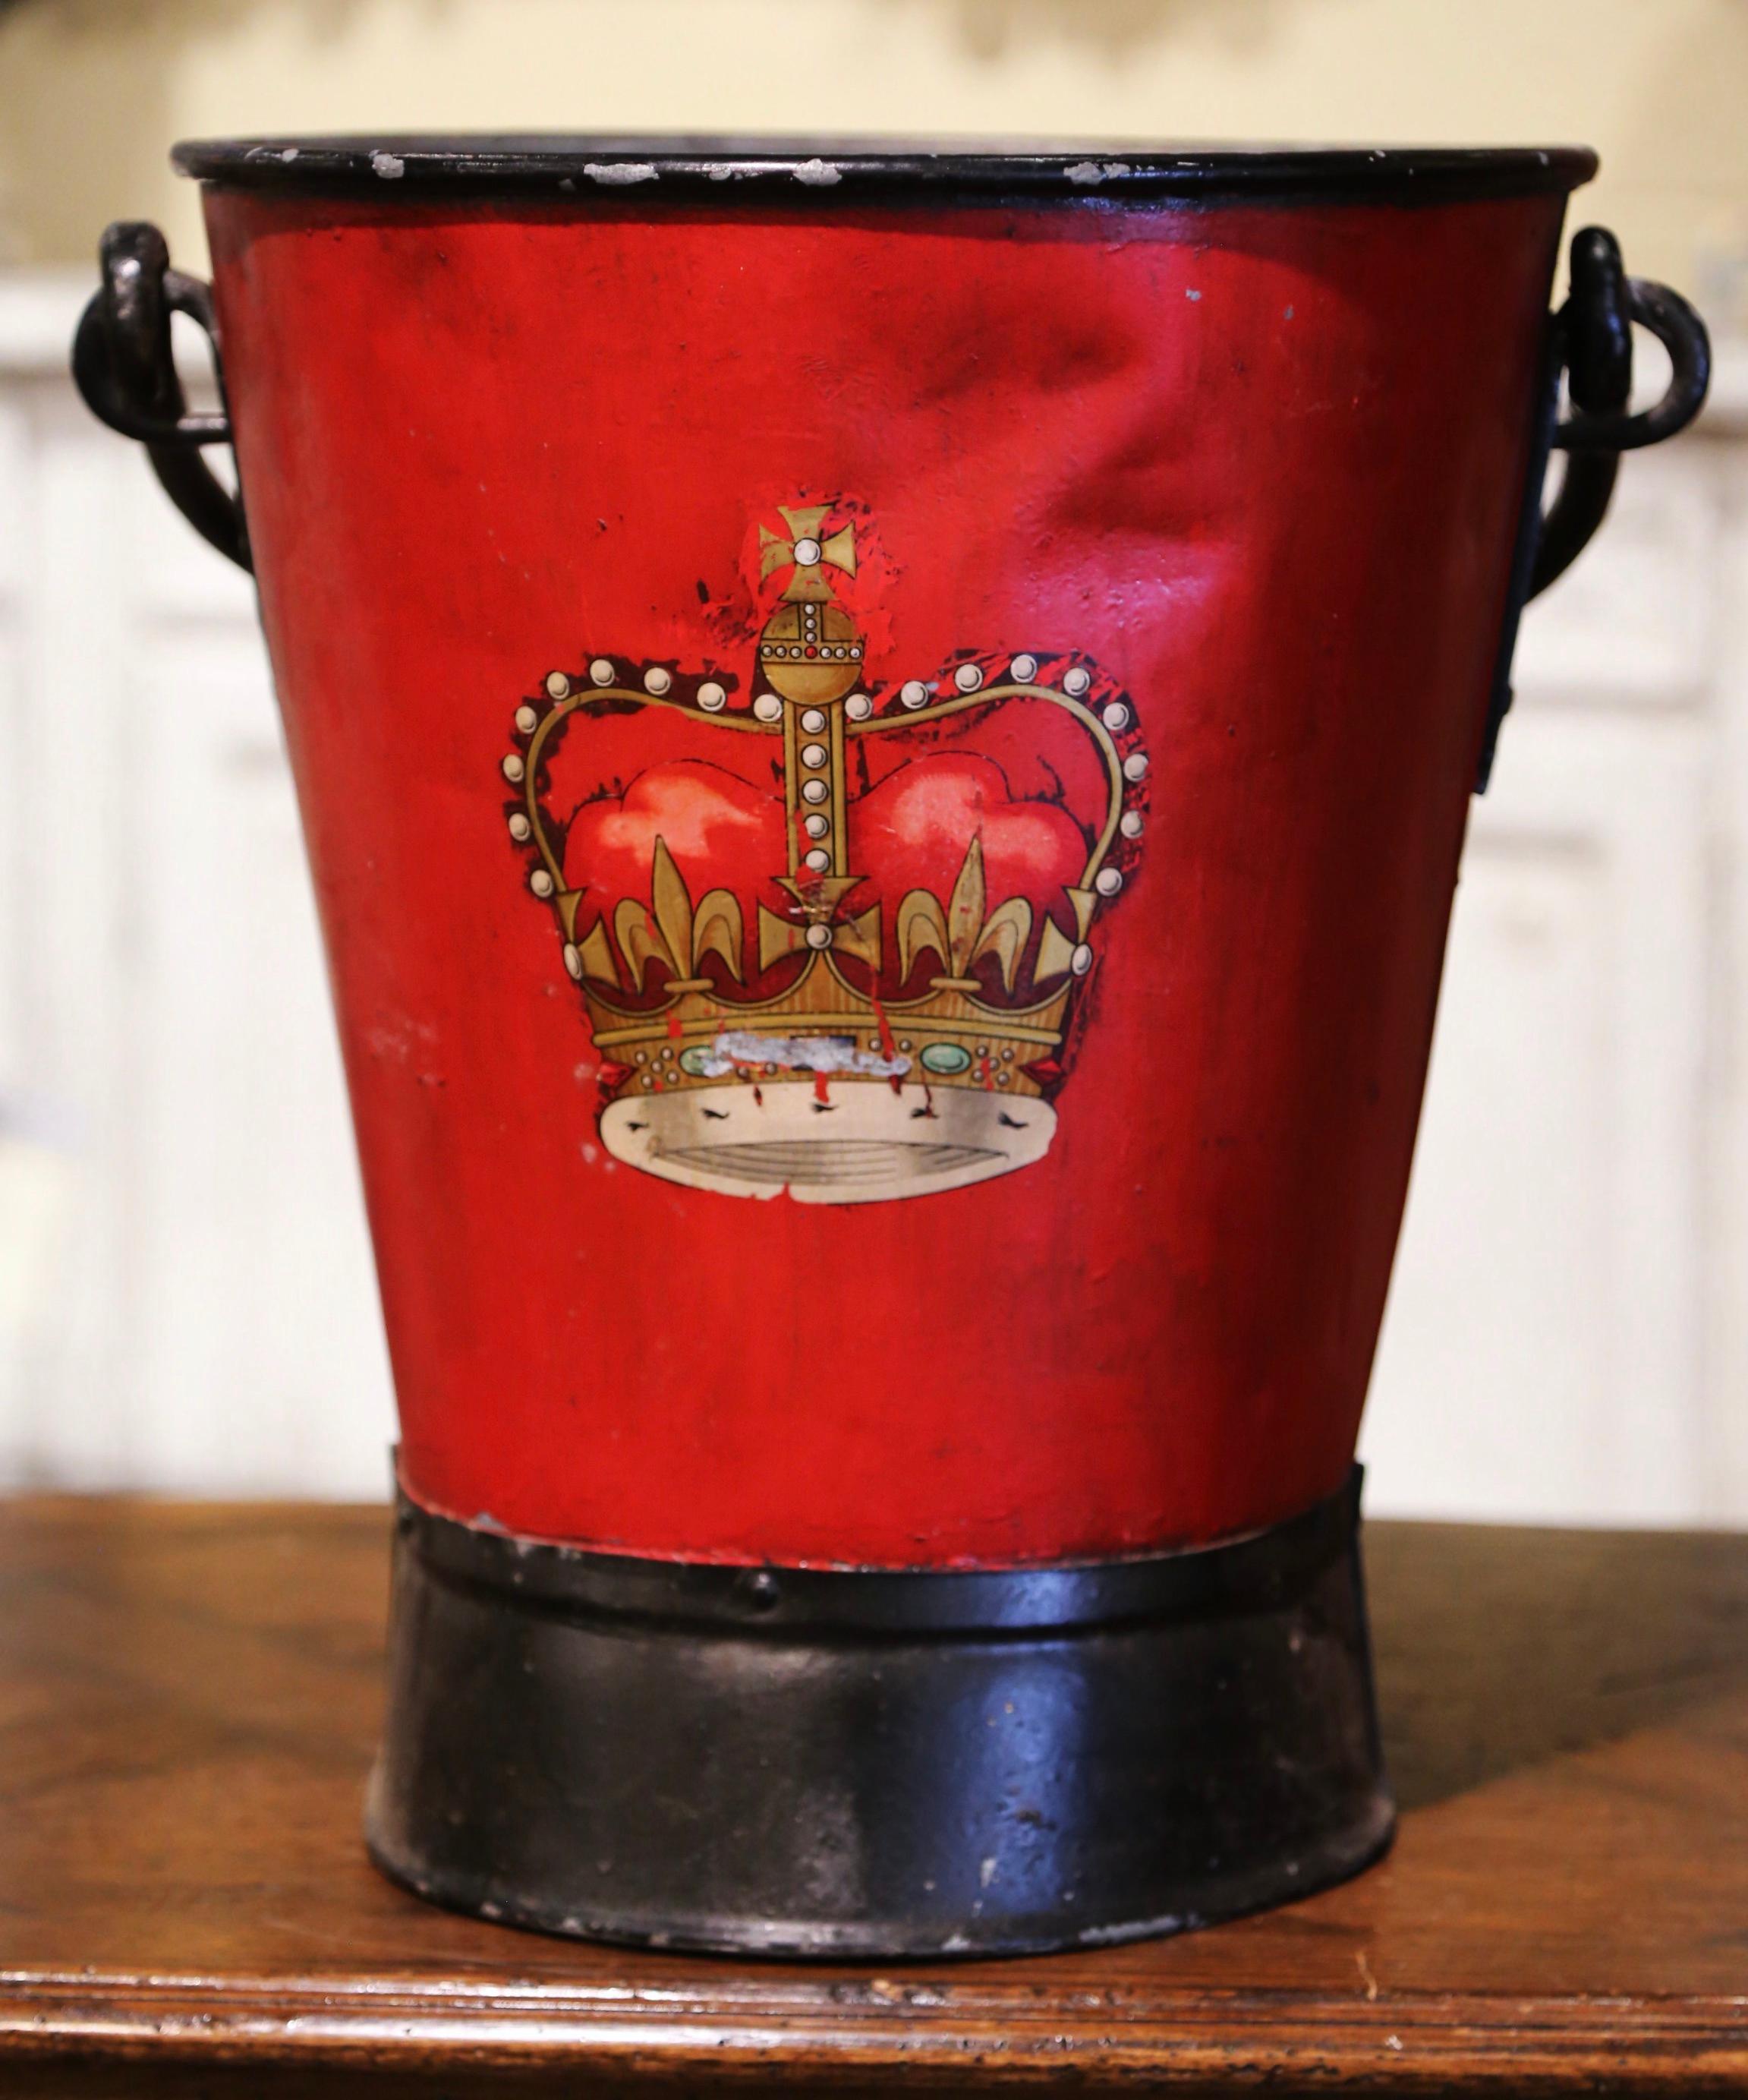 Gilt 19th Century English Hand Painted Iron Coal Bucket with Coat of Arms Decor